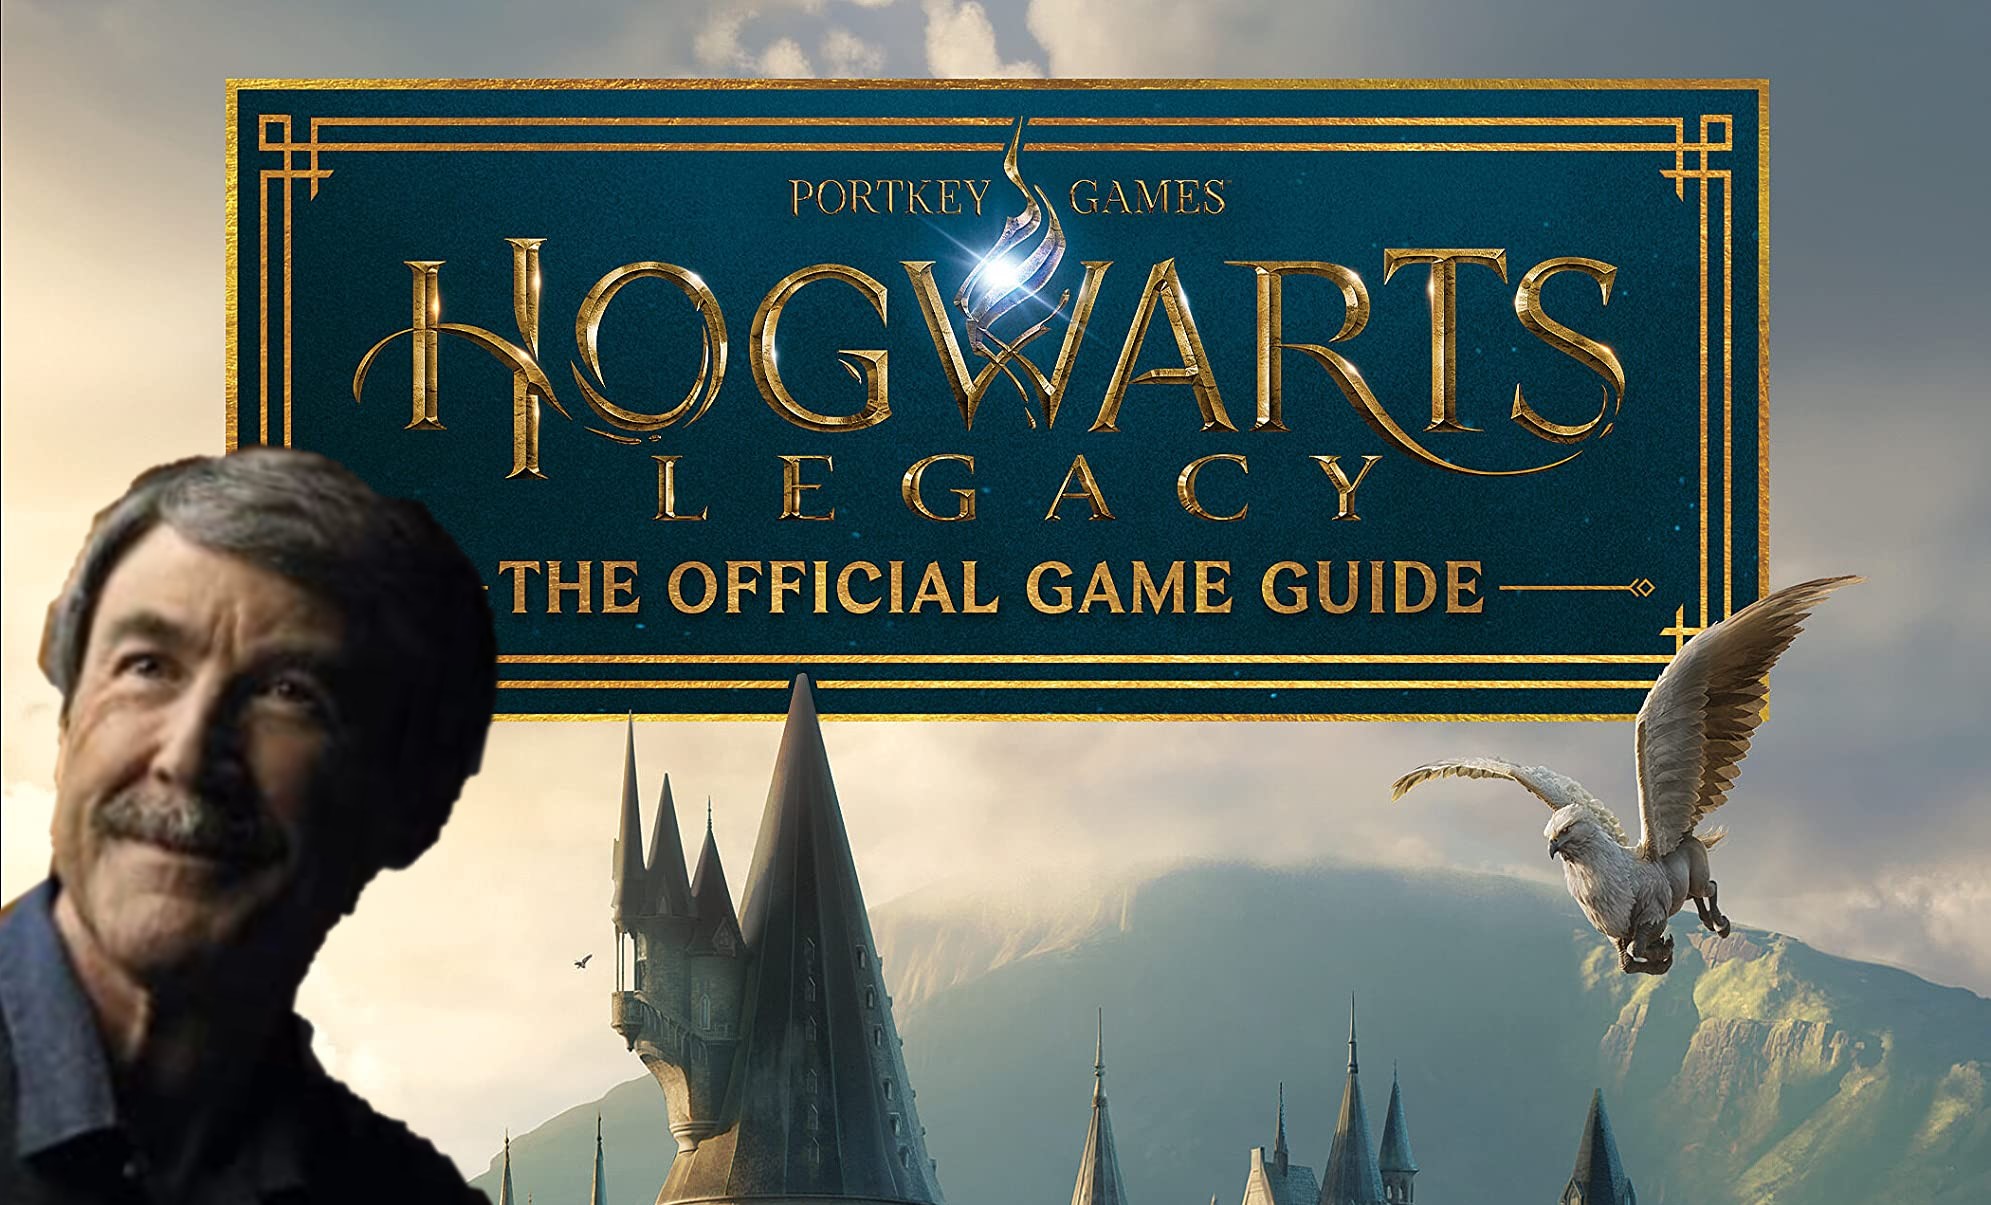 featured image hogwarts legacy official game guide paul davies